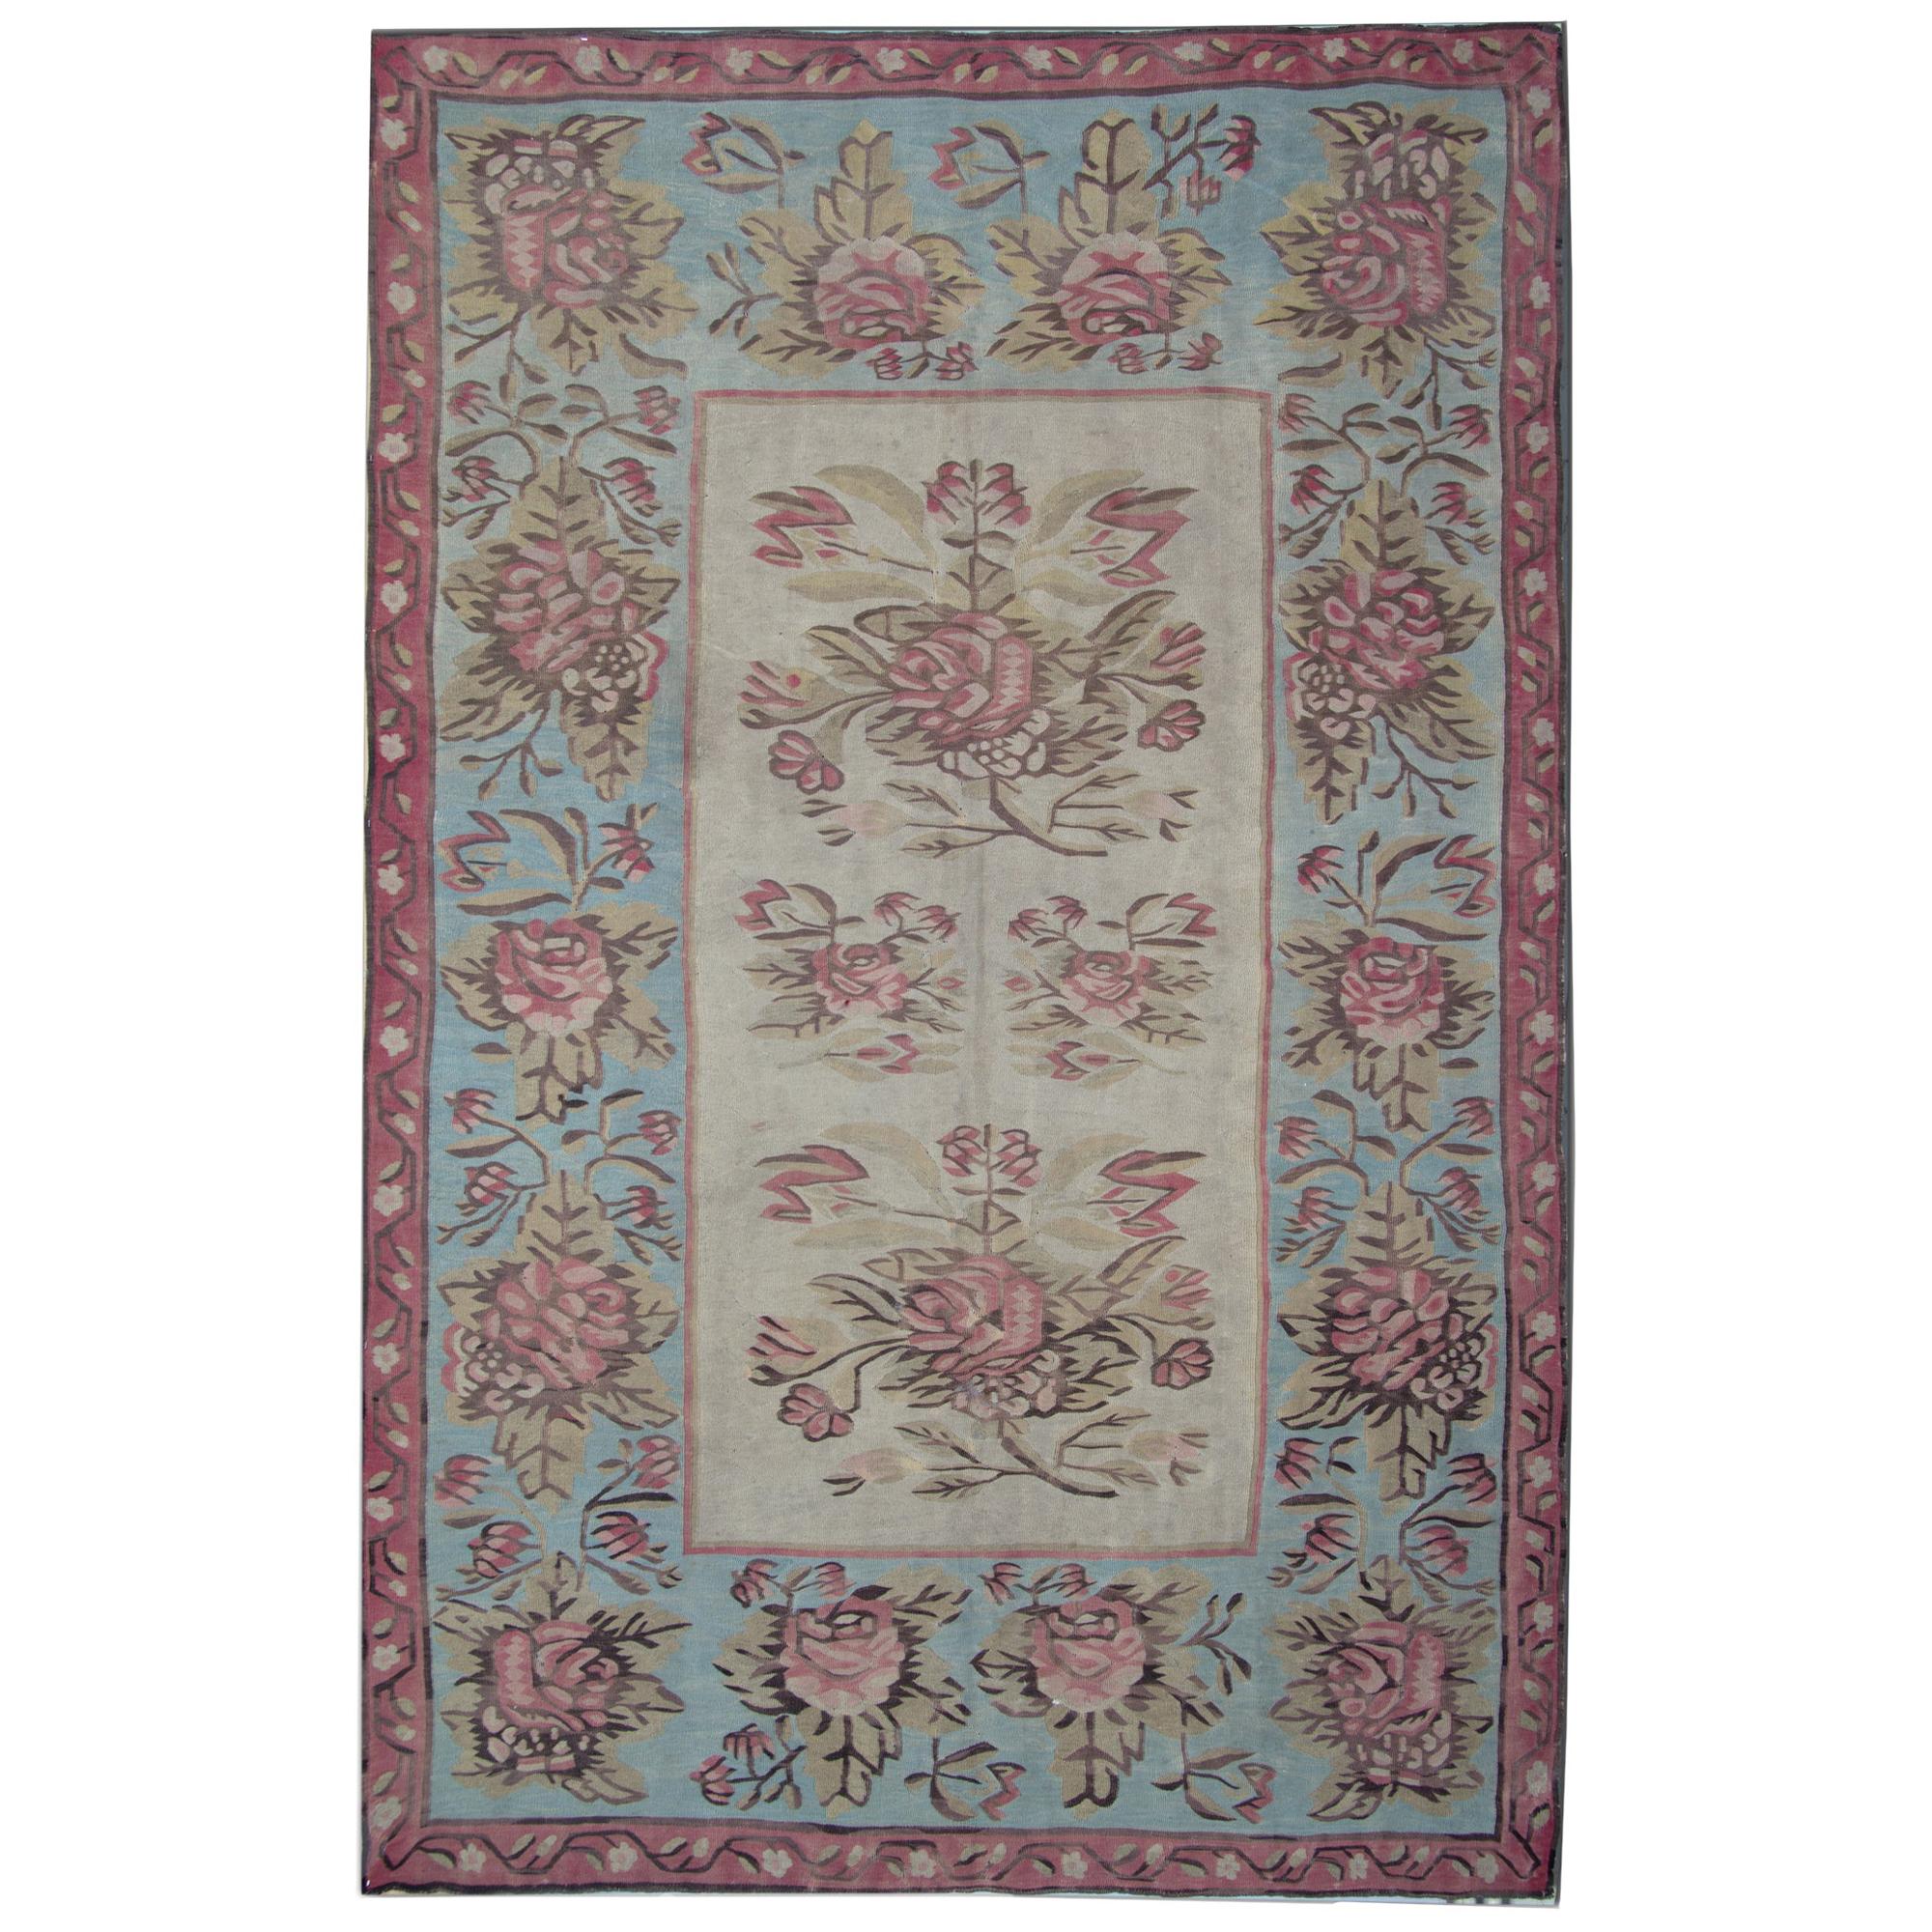 Antique Rugs, Rare Kilim Rugs from Bessarabia, Aubusson Rug, Sky Blue Area Rug For Sale